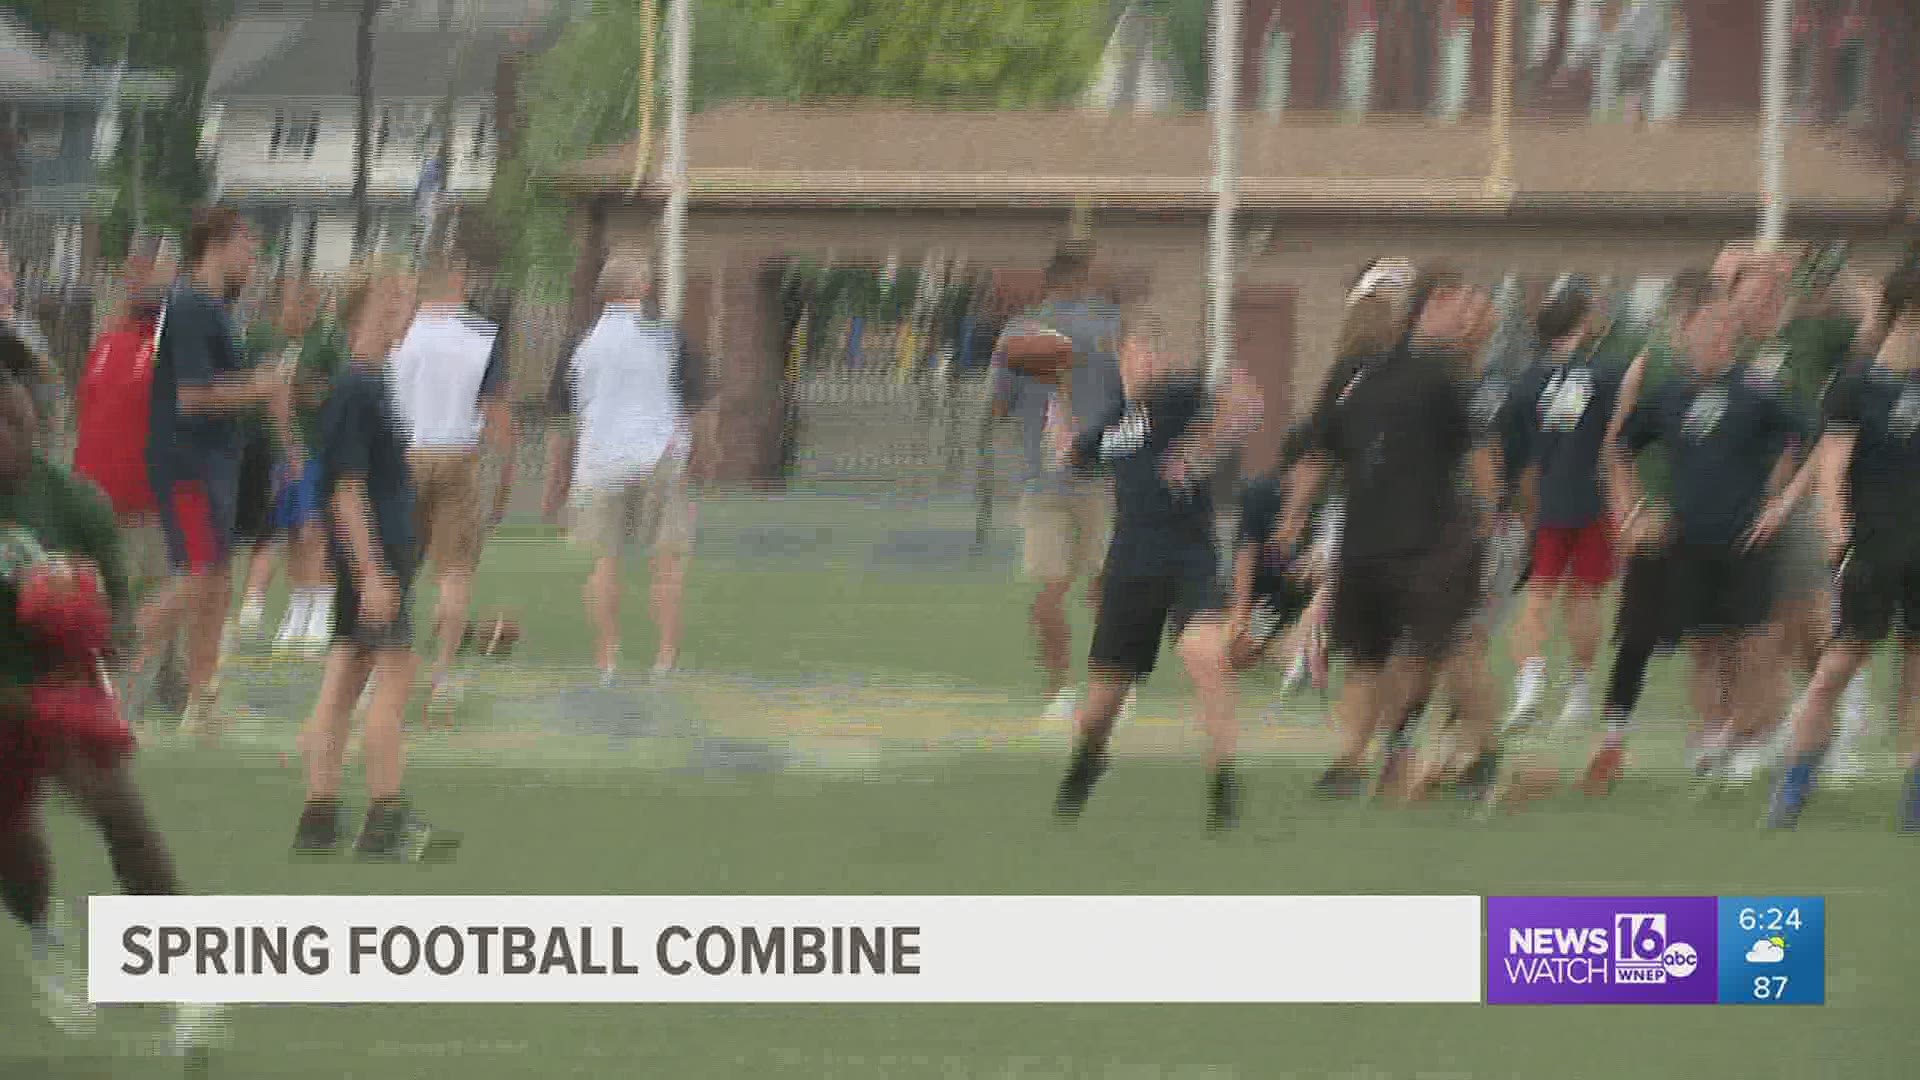 100 High-School Players Come To The Football Combine At John Henzes Veterans Memorial Stadium